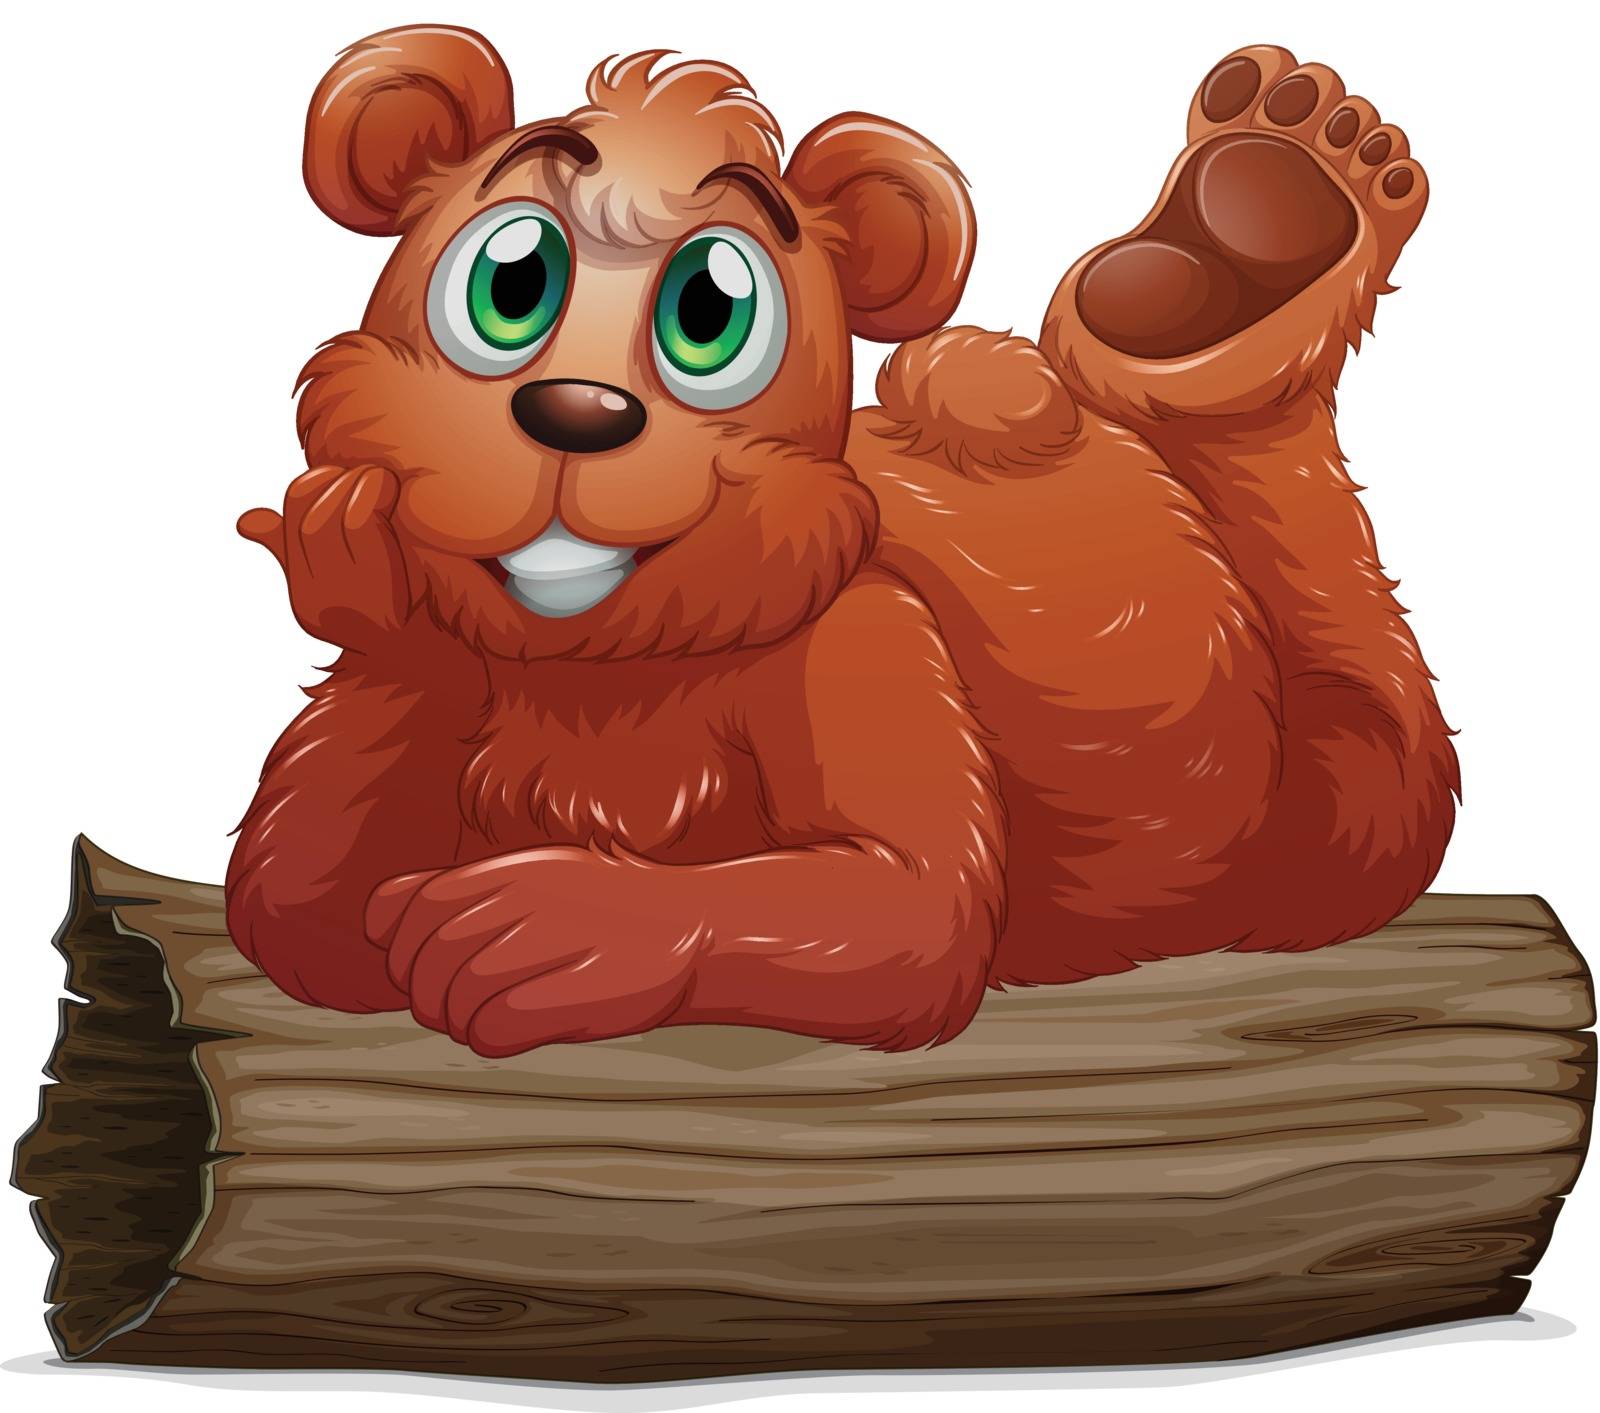 Illustration of a bear resting above the log on a white background